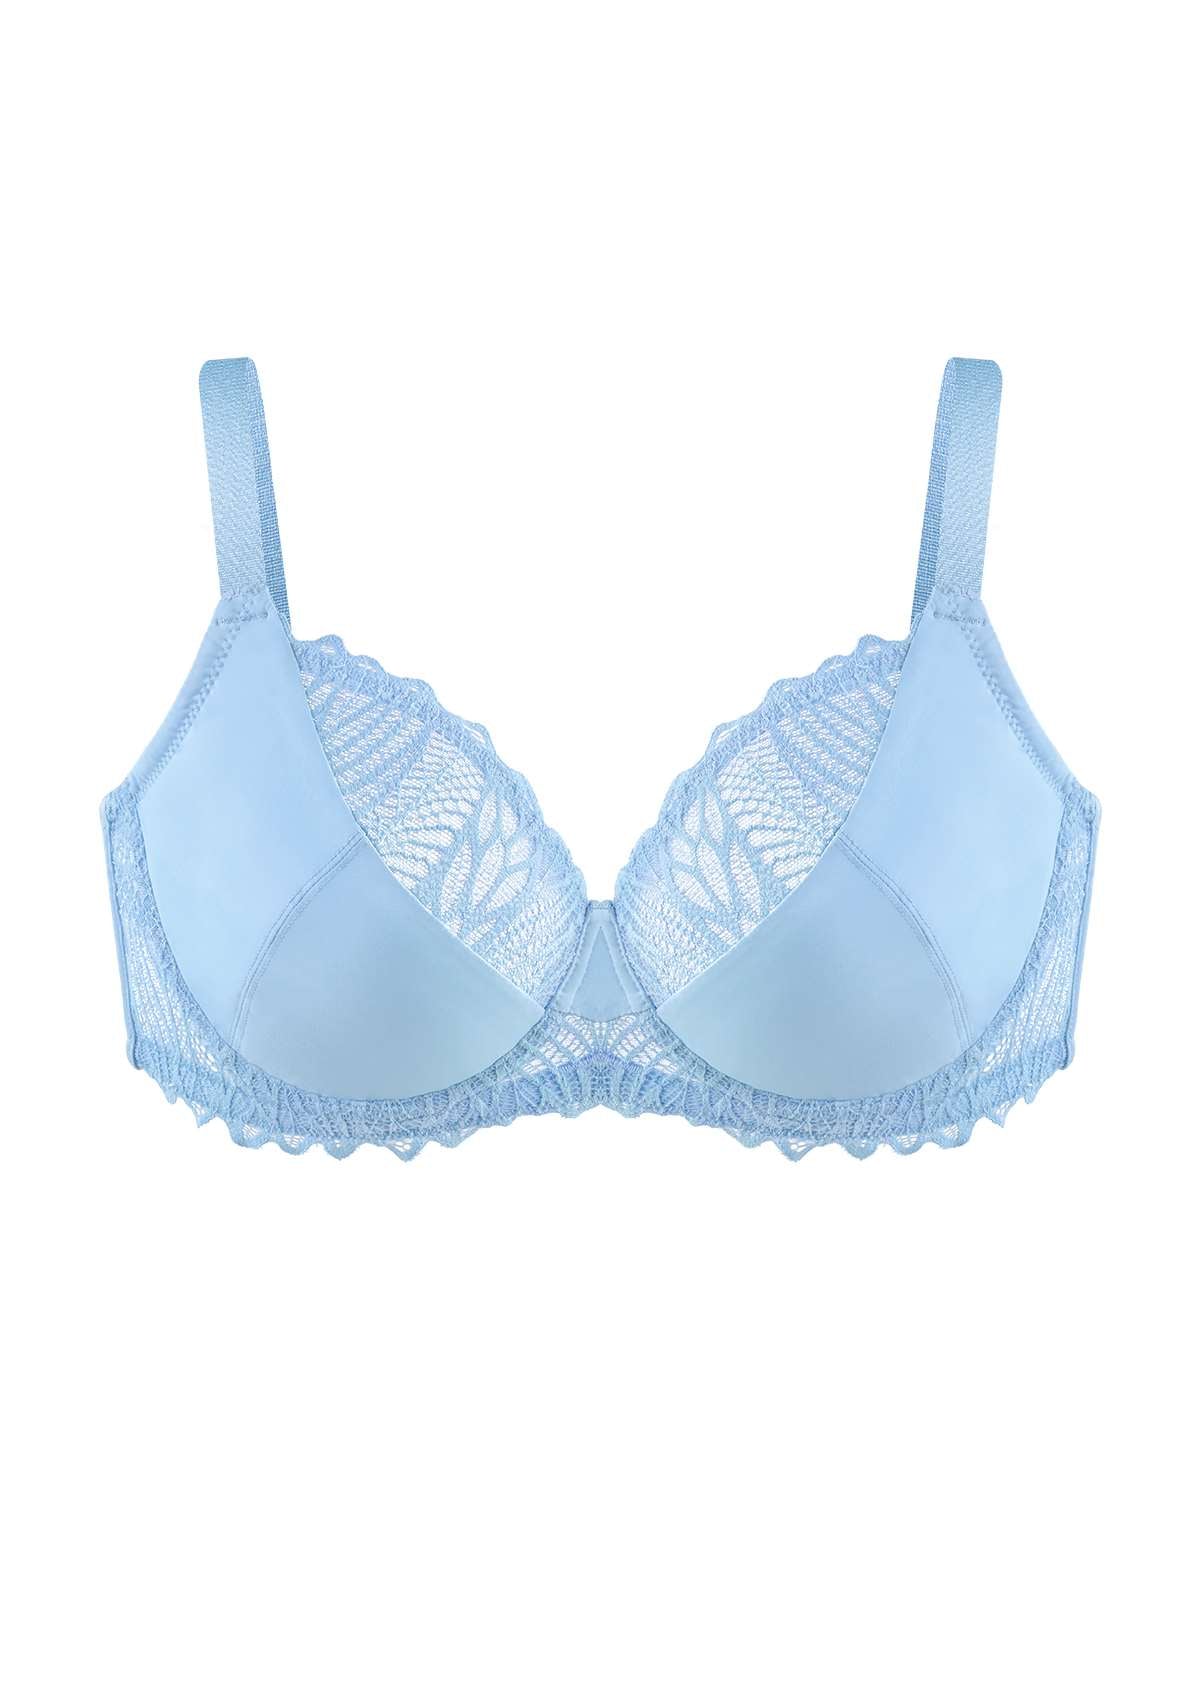 HSIA Pretty Secrets Lace-Trimmed Full Coverage Underwire Bra For Support - Light Pink / 38 / C